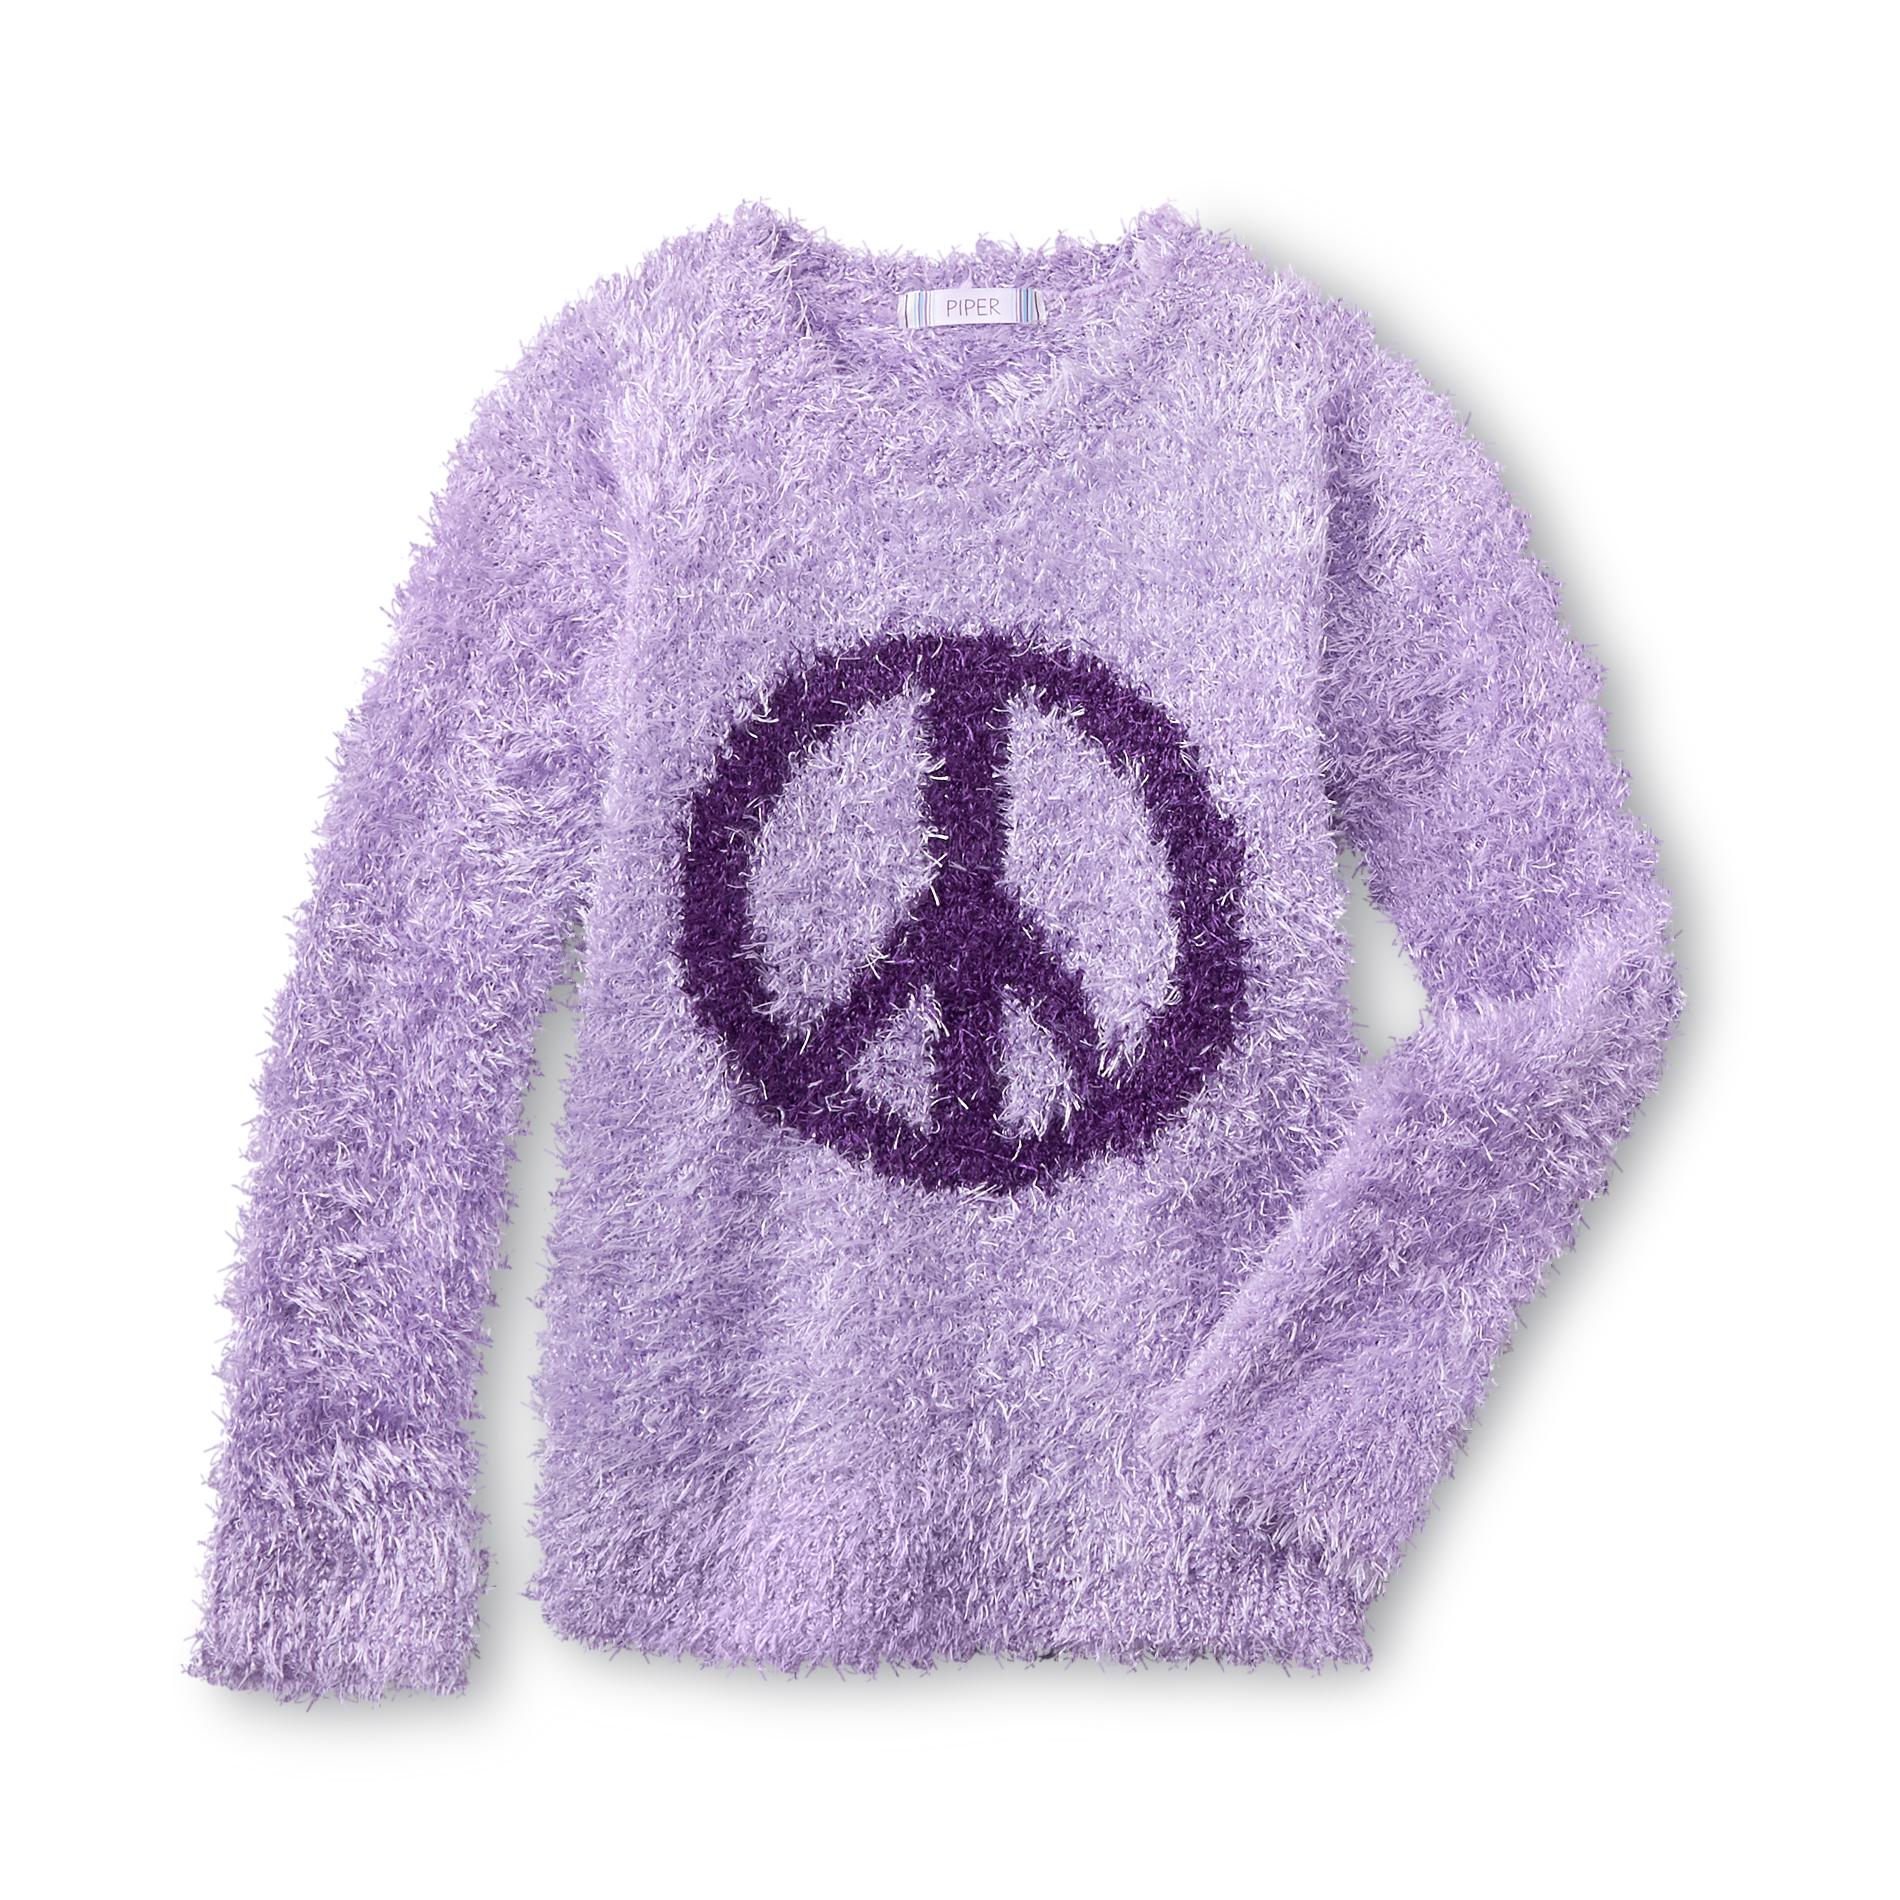 Piper Girl's Novelty Sweater - Peace